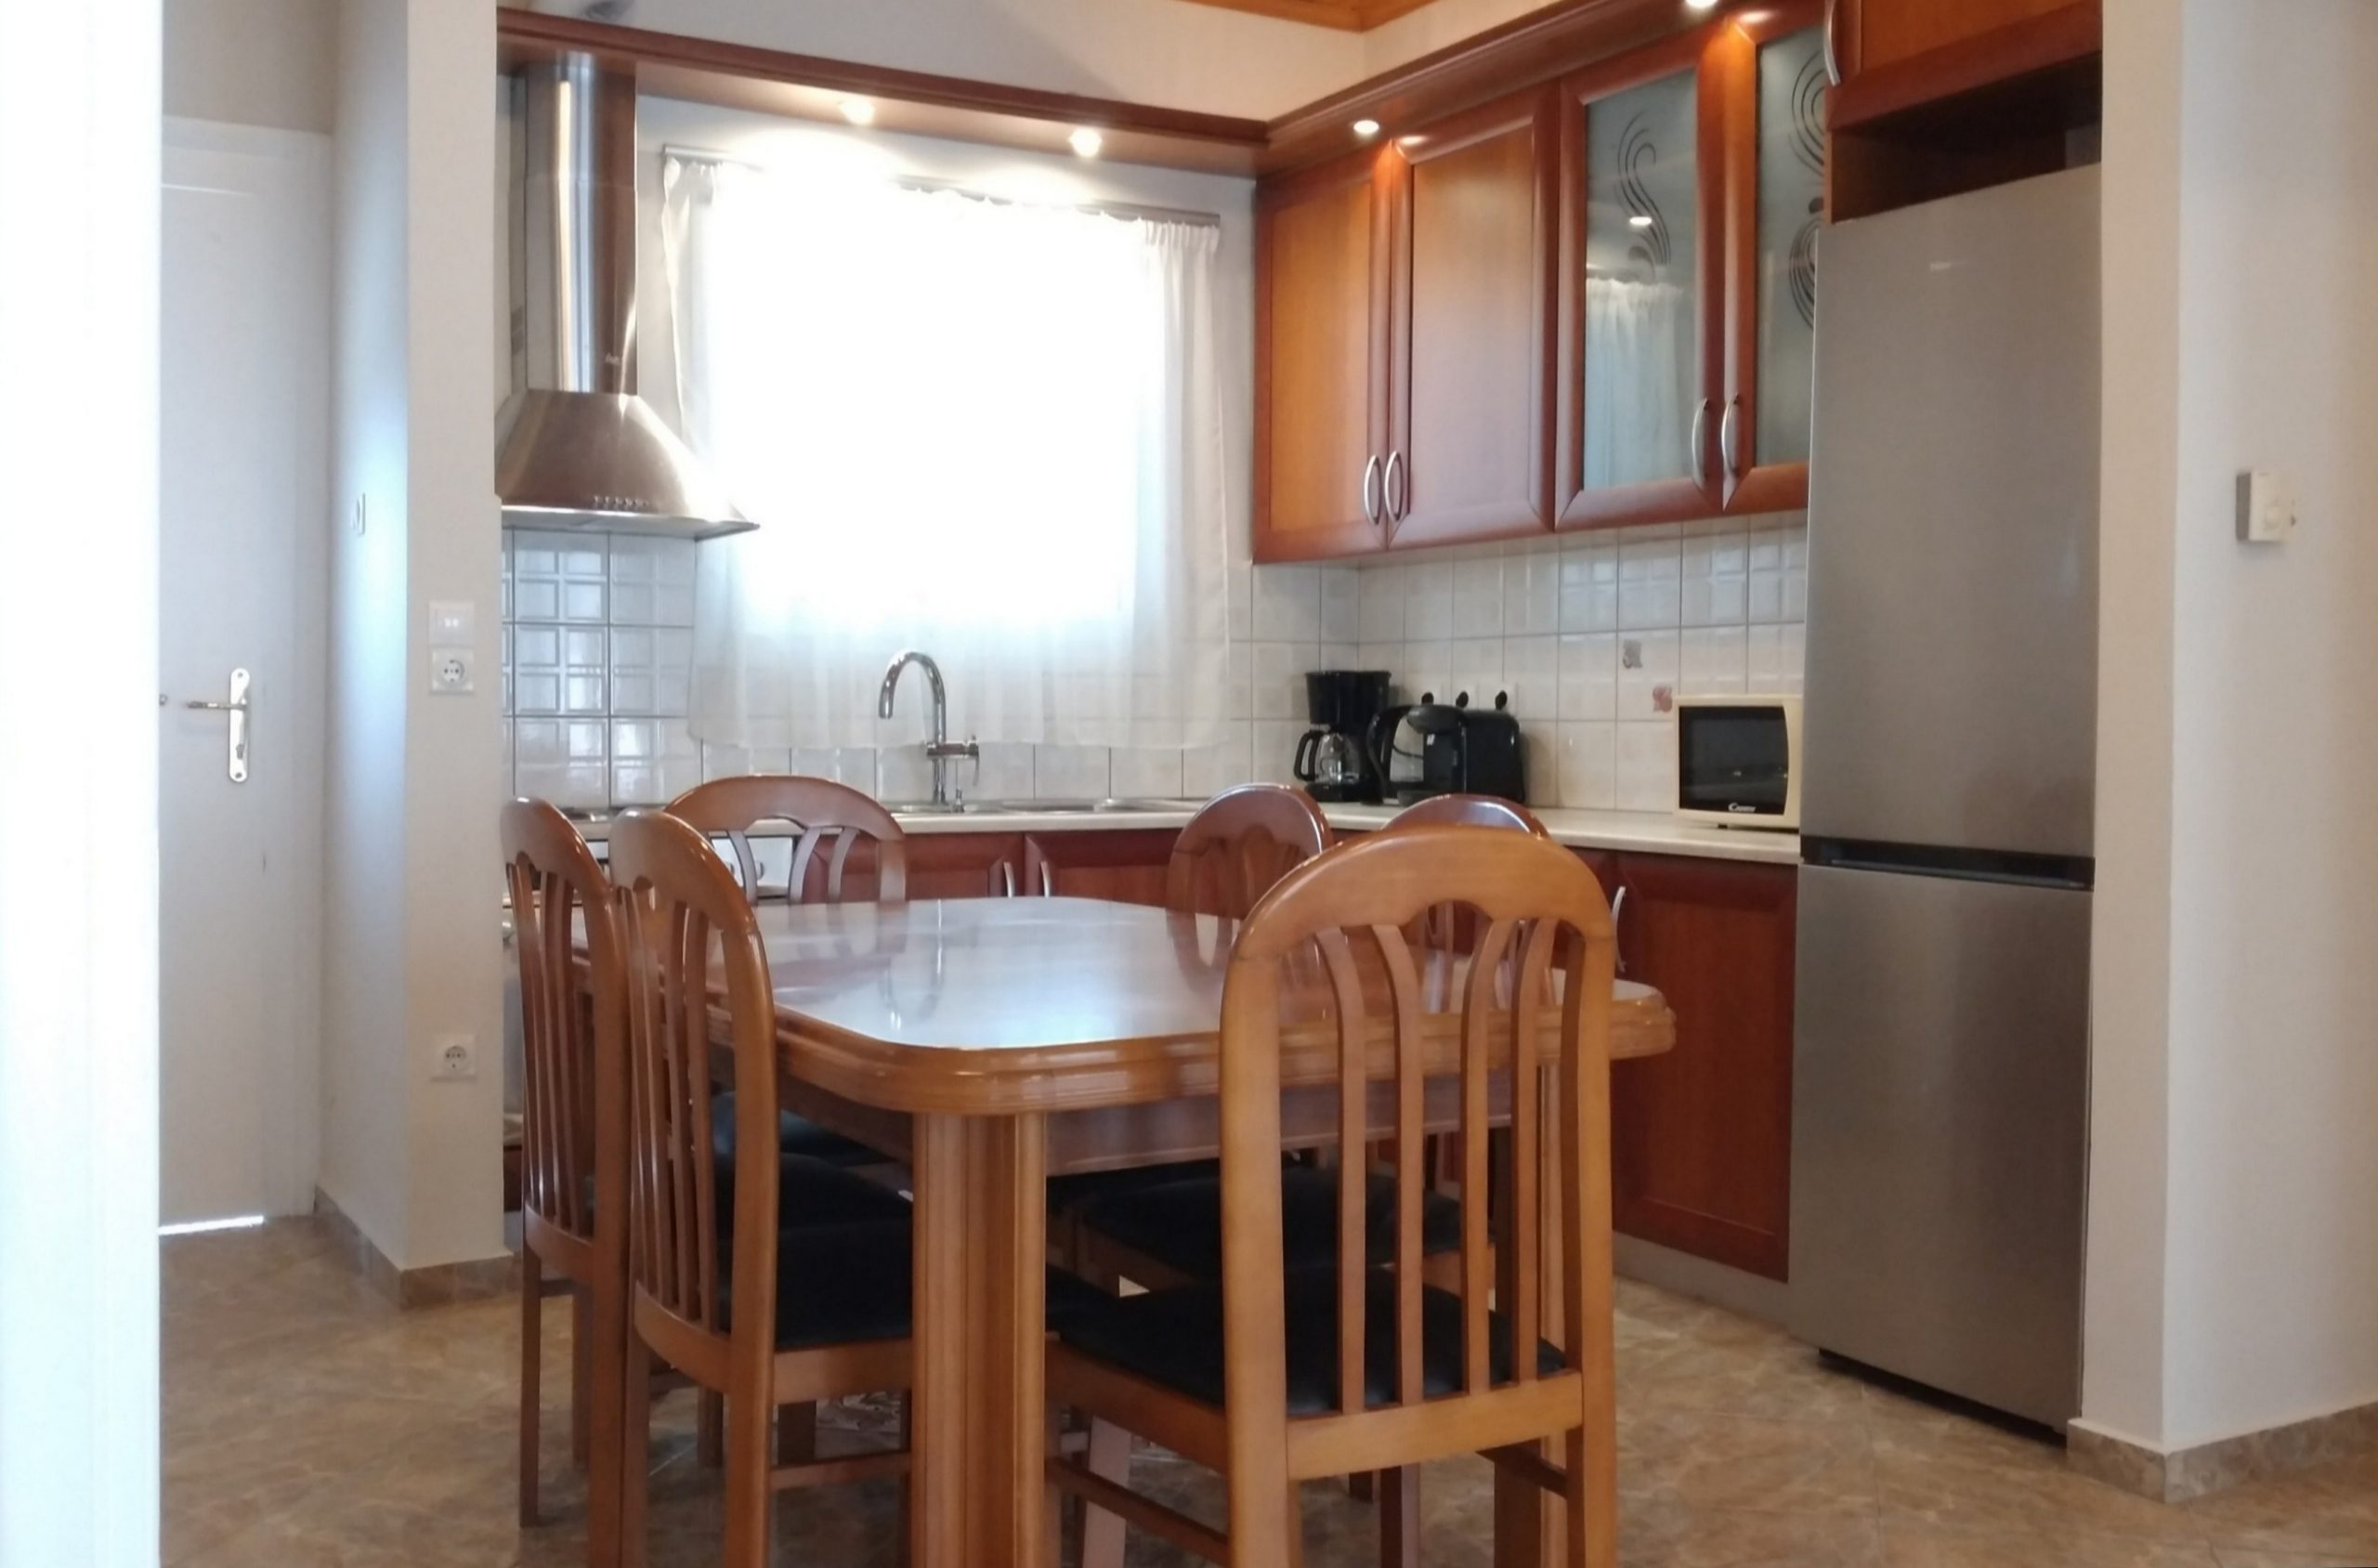 Kitchen of house to rent in Ithaca Greece, Vathi